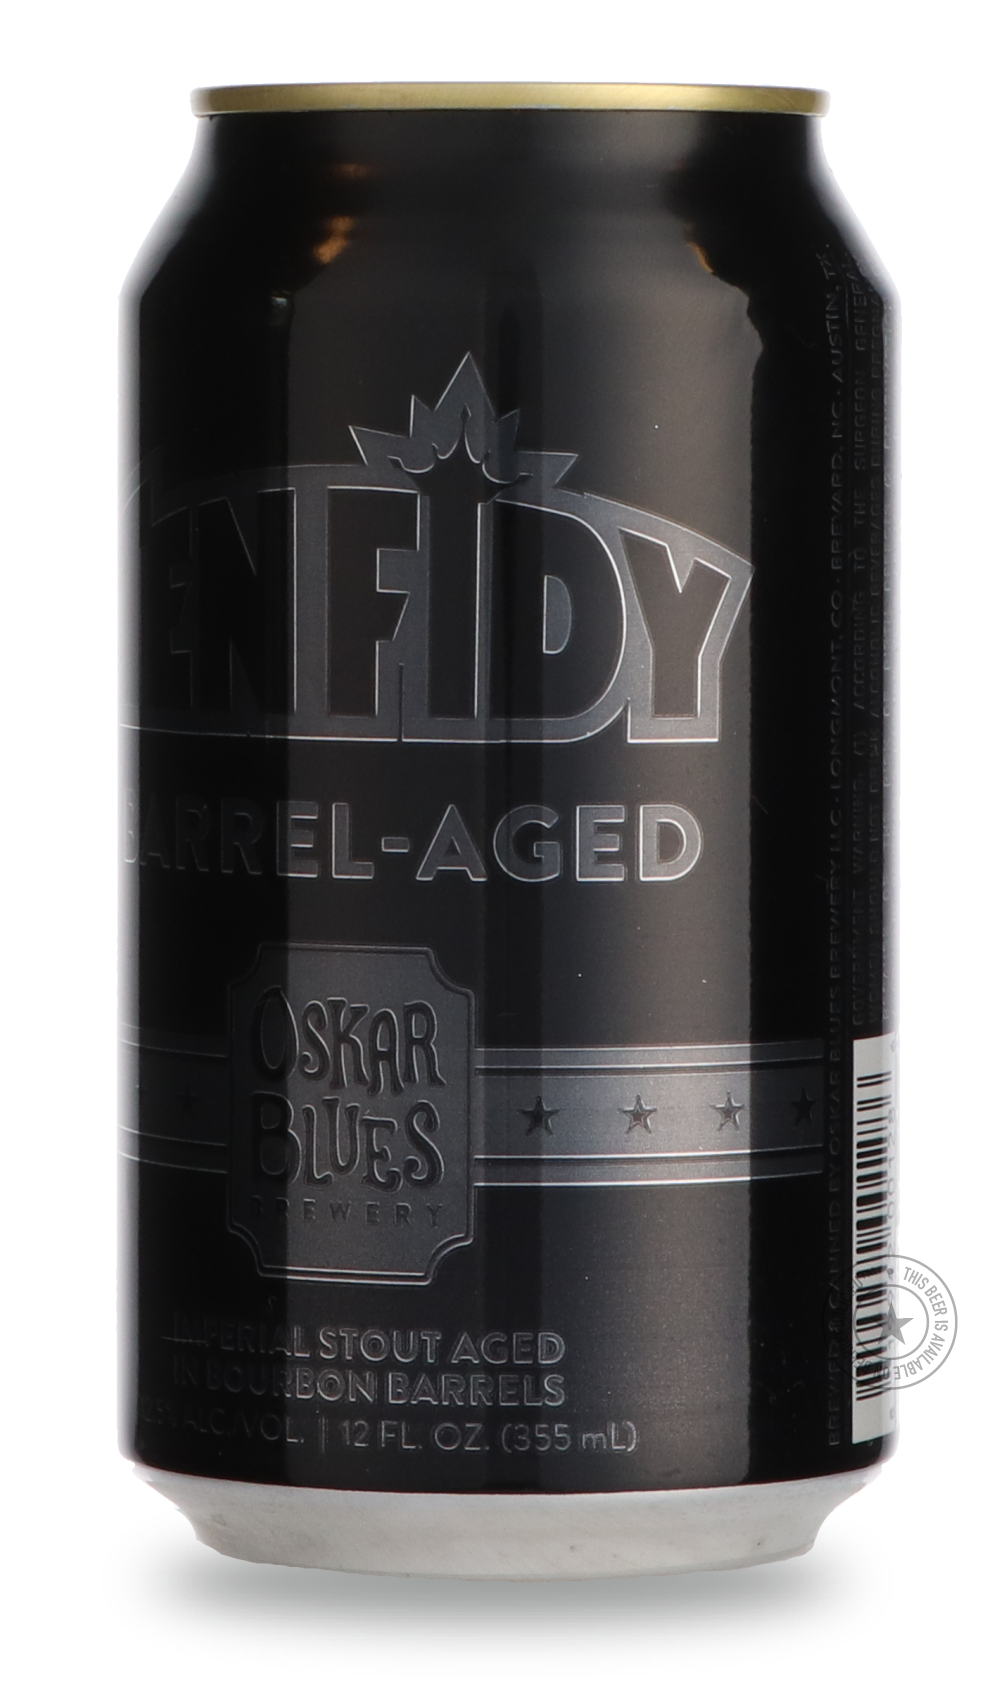 -Oskar Blues- Barrel-Aged Ten Fidy 2023-Stout & Porter- Only @ Beer Republic - The best online beer store for American & Canadian craft beer - Buy beer online from the USA and Canada - Bier online kopen - Amerikaans bier kopen - Craft beer store - Craft beer kopen - Amerikanisch bier kaufen - Bier online kaufen - Acheter biere online - IPA - Stout - Porter - New England IPA - Hazy IPA - Imperial Stout - Barrel Aged - Barrel Aged Imperial Stout - Brown - Dark beer - Blond - Blonde - Pilsner - Lager - Wheat -